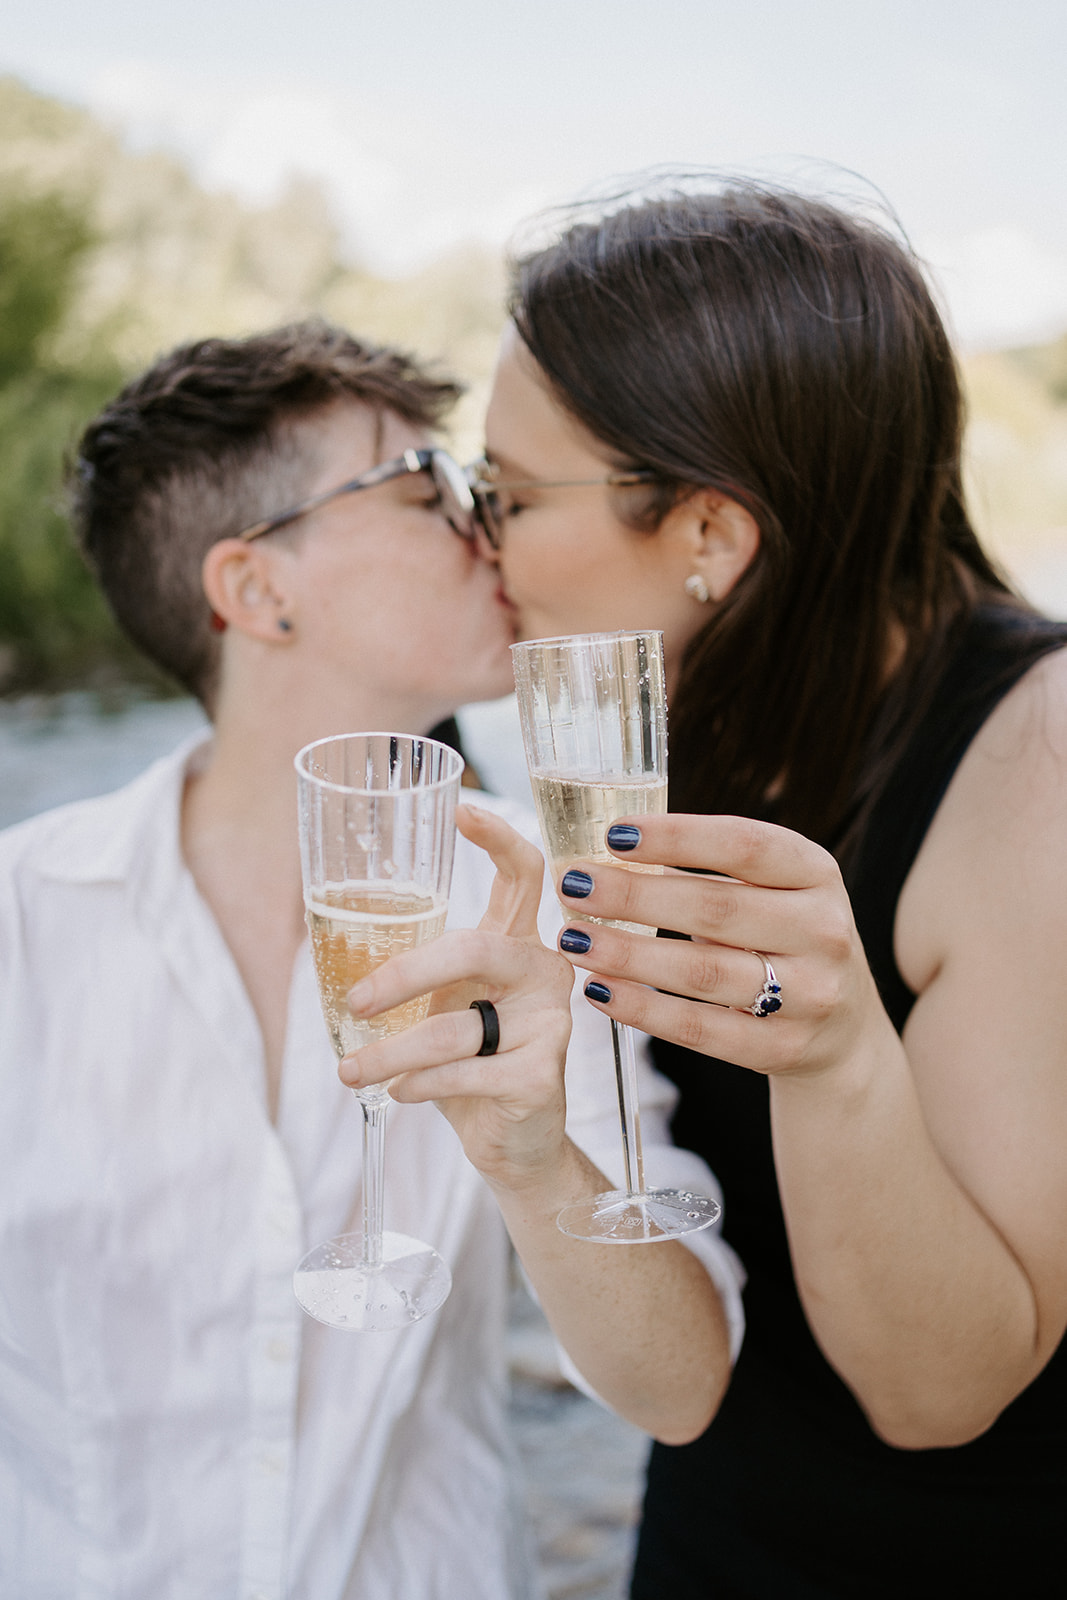 Two people kissing while holding out champagne glasses in front of them.